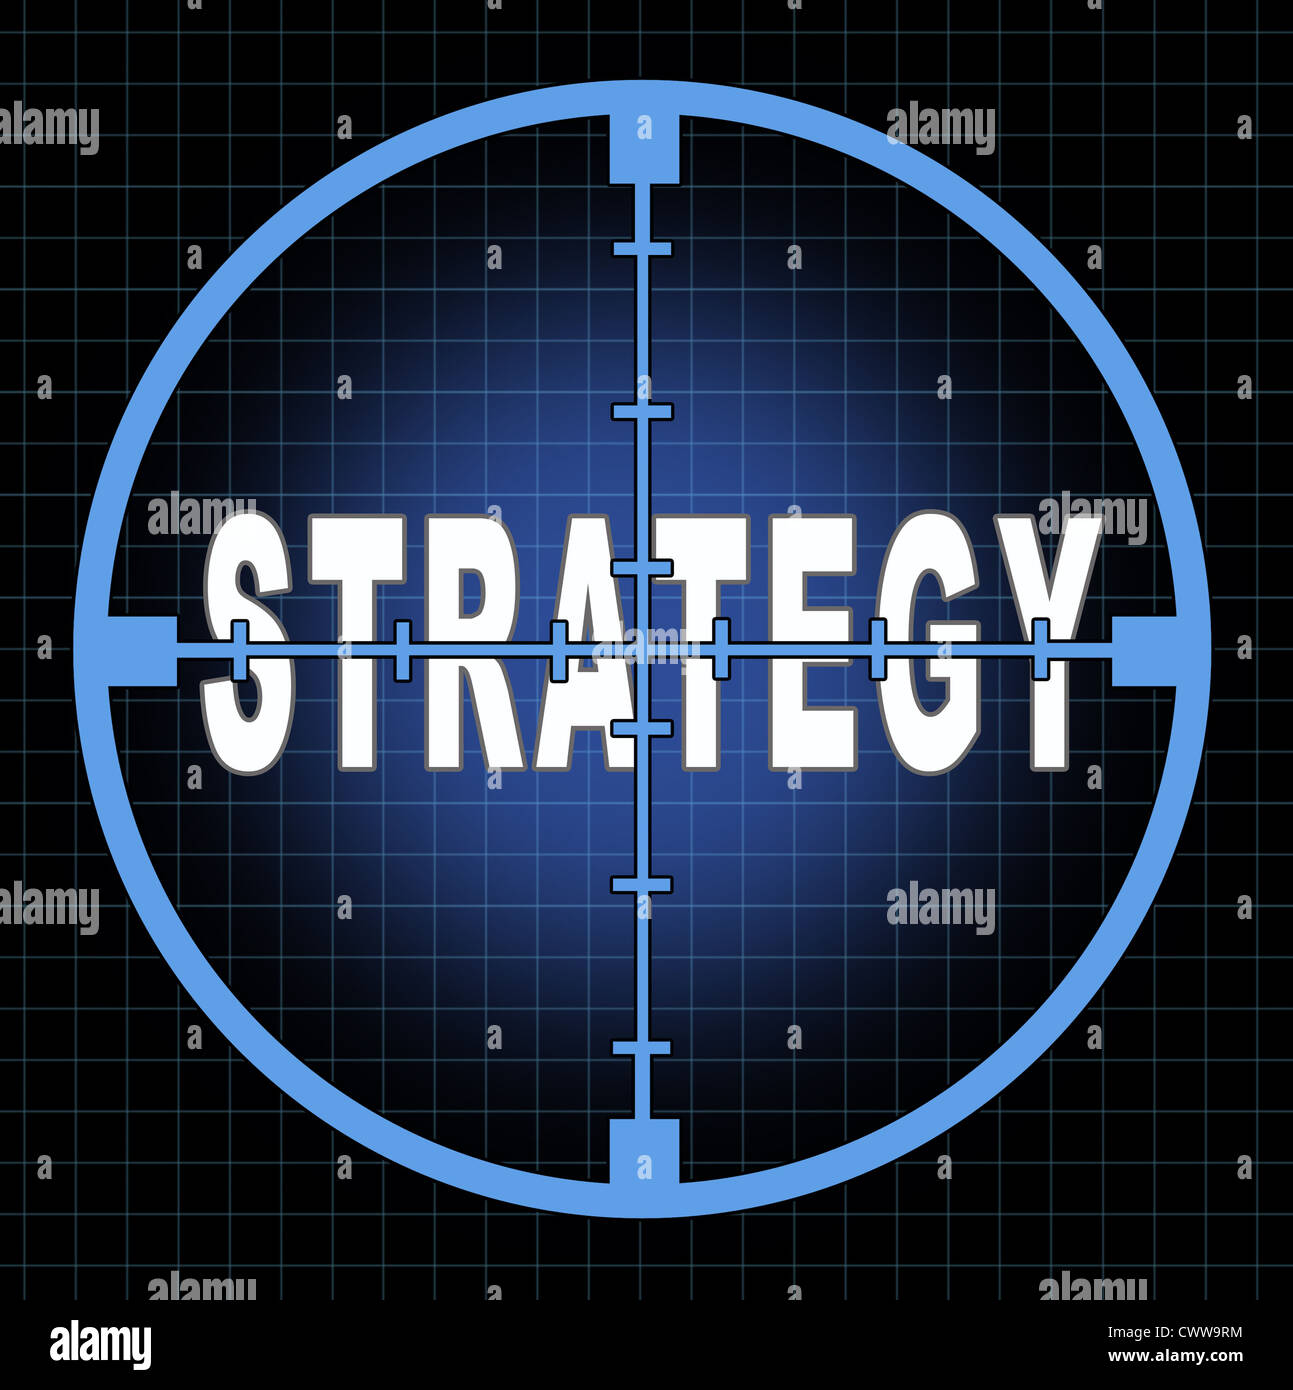 Strategy and focus on business goals and planning represented by an aiming crosshairs with the text showing the concept to see clearly the strategic aim and passion to acheive planned success. Stock Photo